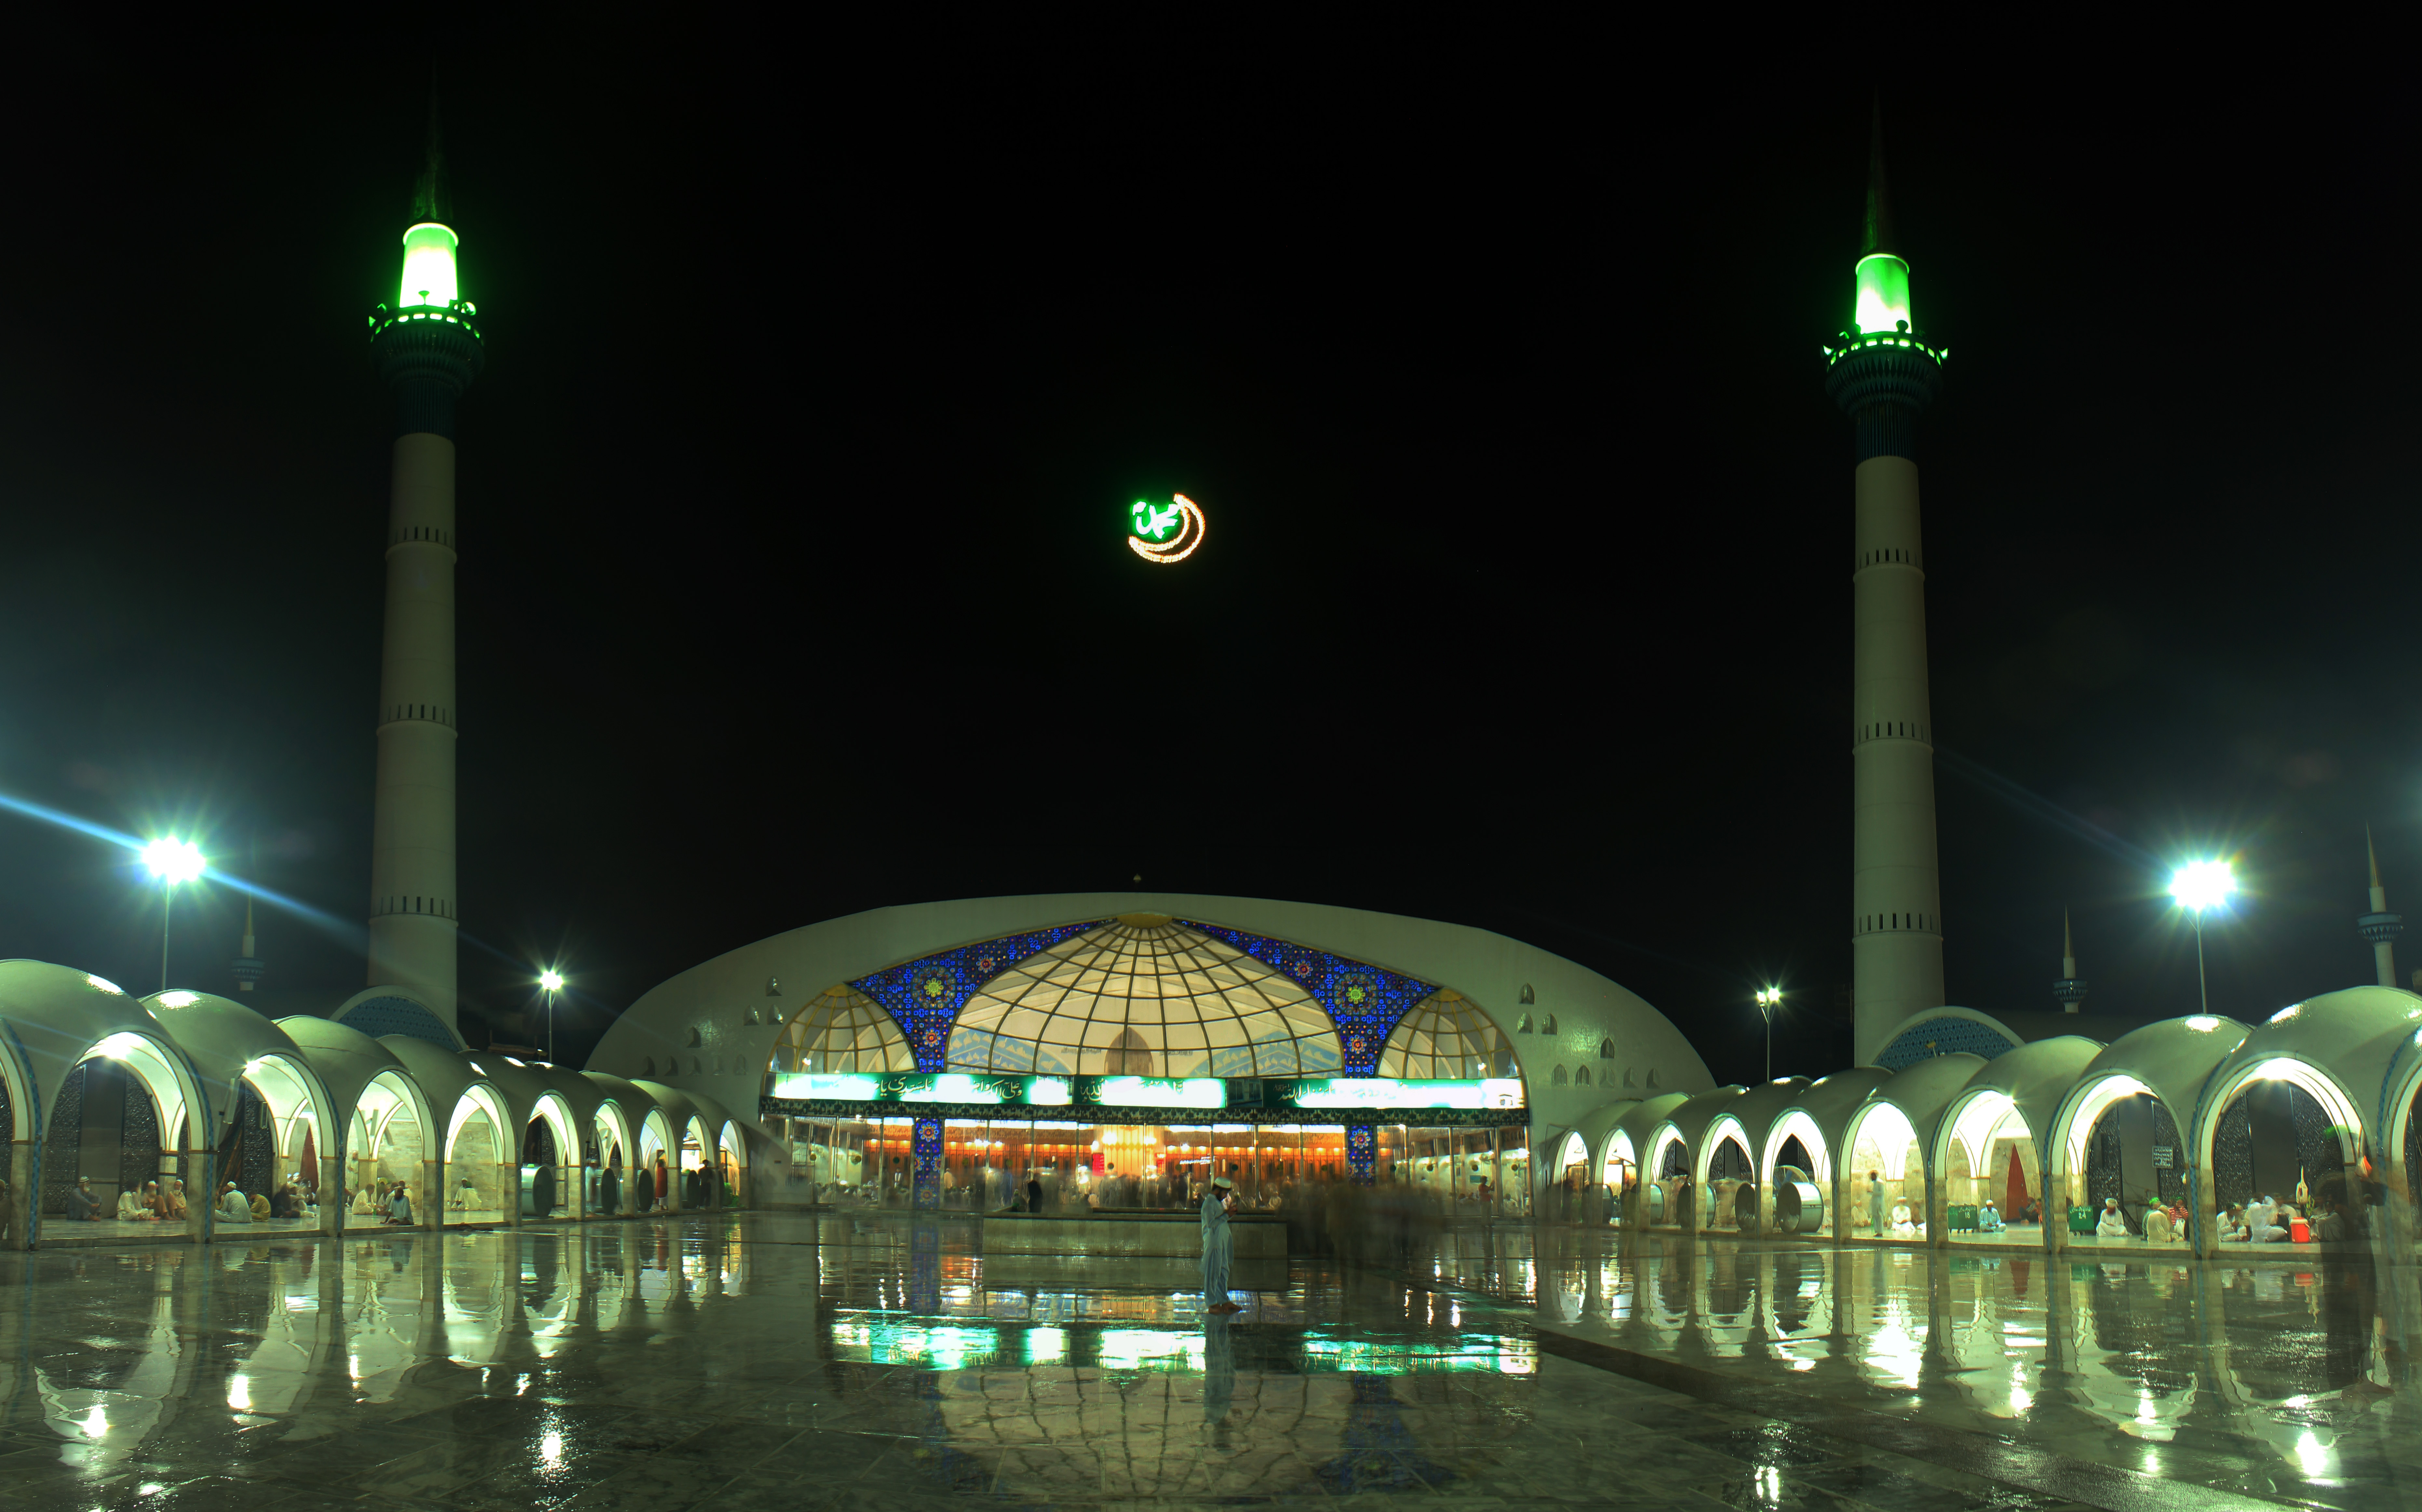 The Data Darbar Mosque Image Credit: Meemjee [CC BY-SA 3.0 (https://creativecommons.org/licenses/by-sa/3.0)]